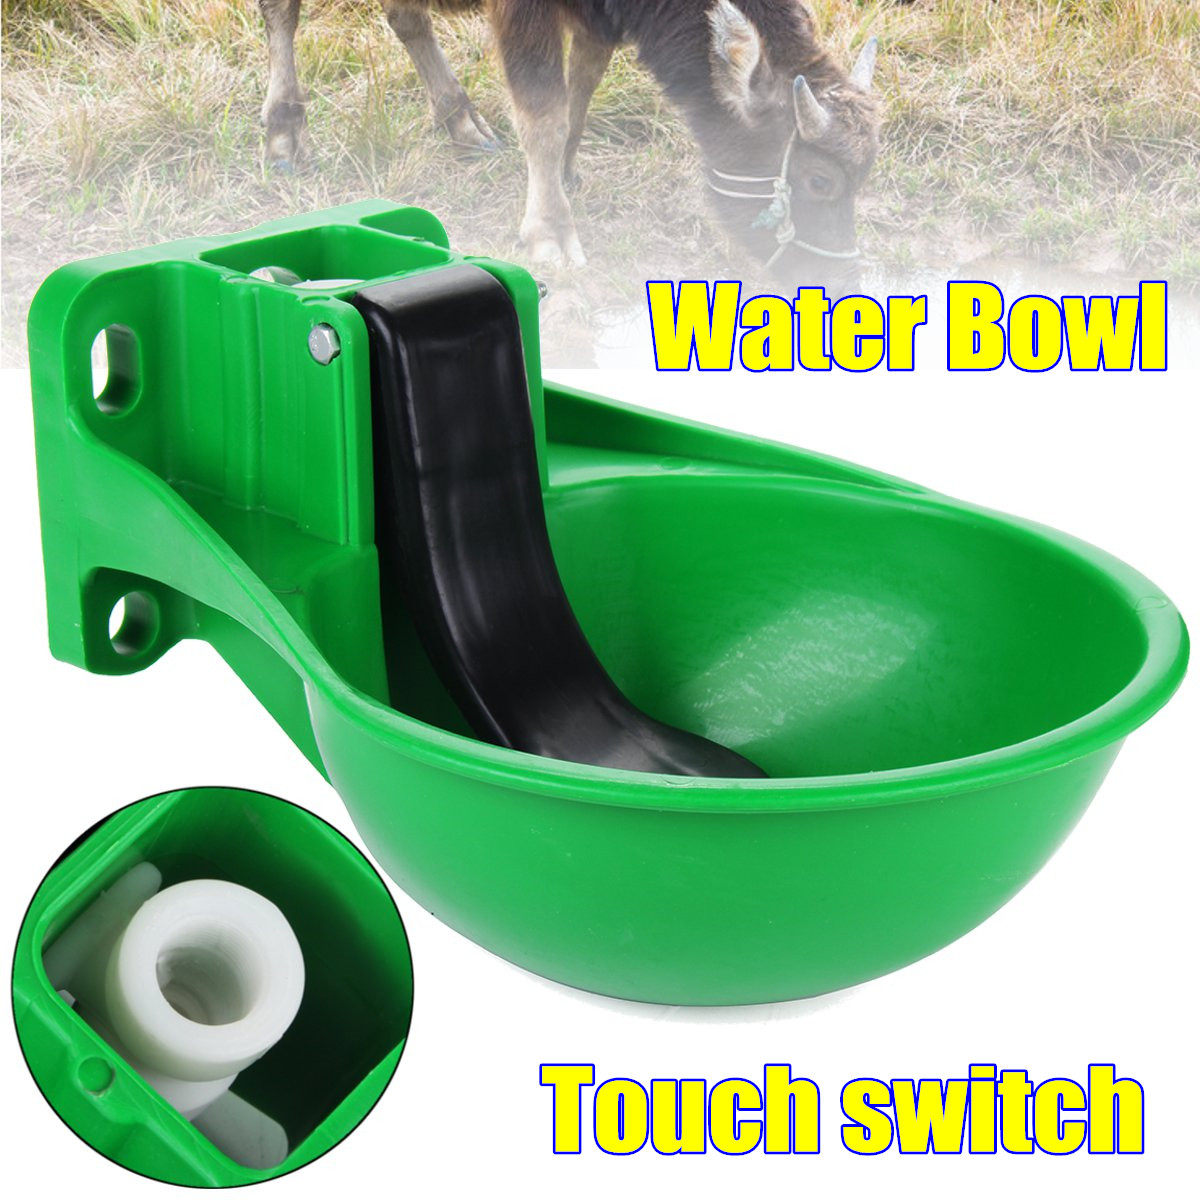 Large-Automatic-Touch-Switch-Water-Bowl-Bottle-Dispenser-Farm-Cow-Horse-Drinking-Waterer-1385253-2